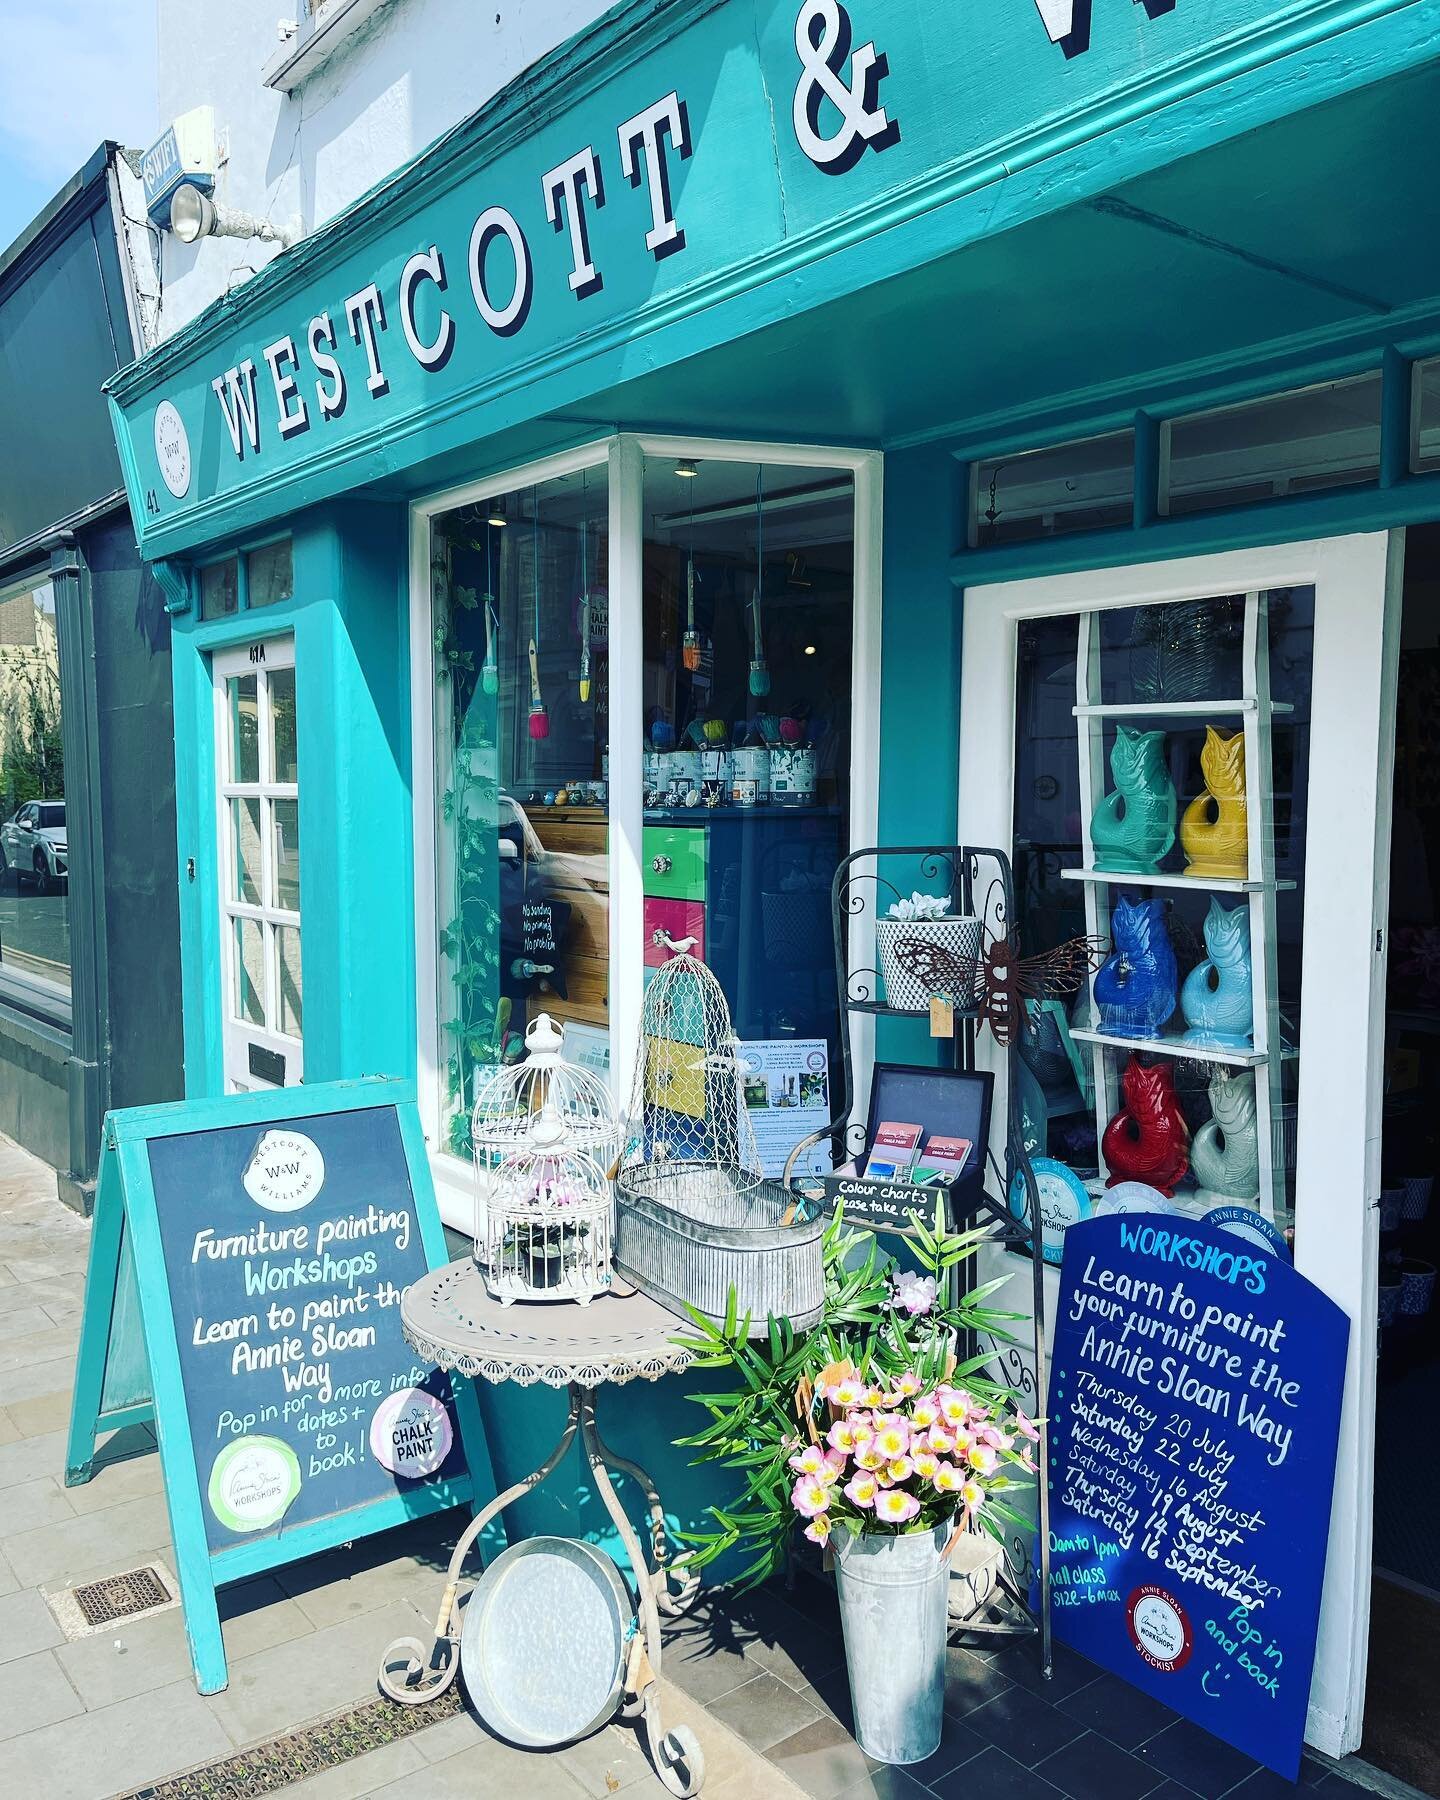 If you&rsquo;re looking for things to do during the summer how about refreshing your tired old furniture with a lick of paint &hellip; I&rsquo;ve got everything you need &hellip; come on in and see me 🤩

#summerholidays #schoolsoutforsummer #furnitu